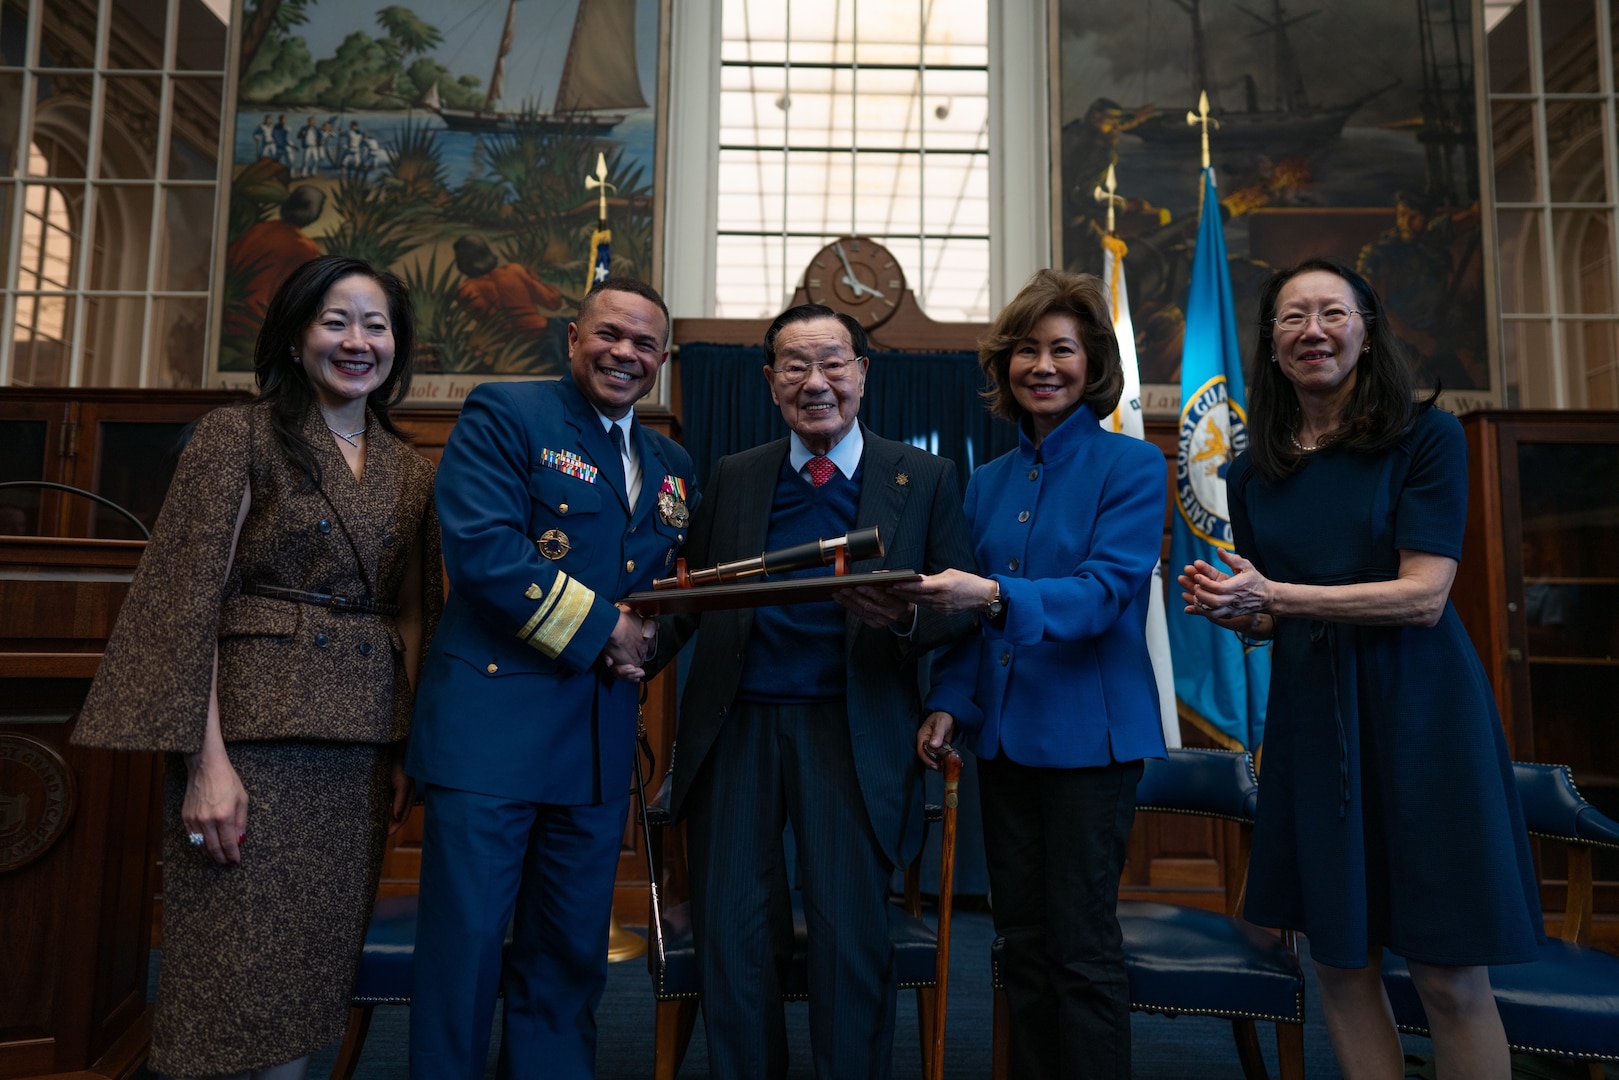 The U.S. Coast Guard Academy recognized Dr. James Chao as the first recipient of the newly established Scientæ Cedit Mare Award in New London, 27 Oct. 2023. Dr. Chao accepted the award with his family, the Honorable Elaine Chao, her sisters May and Angela, and grandson James. (Coast Guard photograph by Petty Officer 3rd Class Matt Thieme)